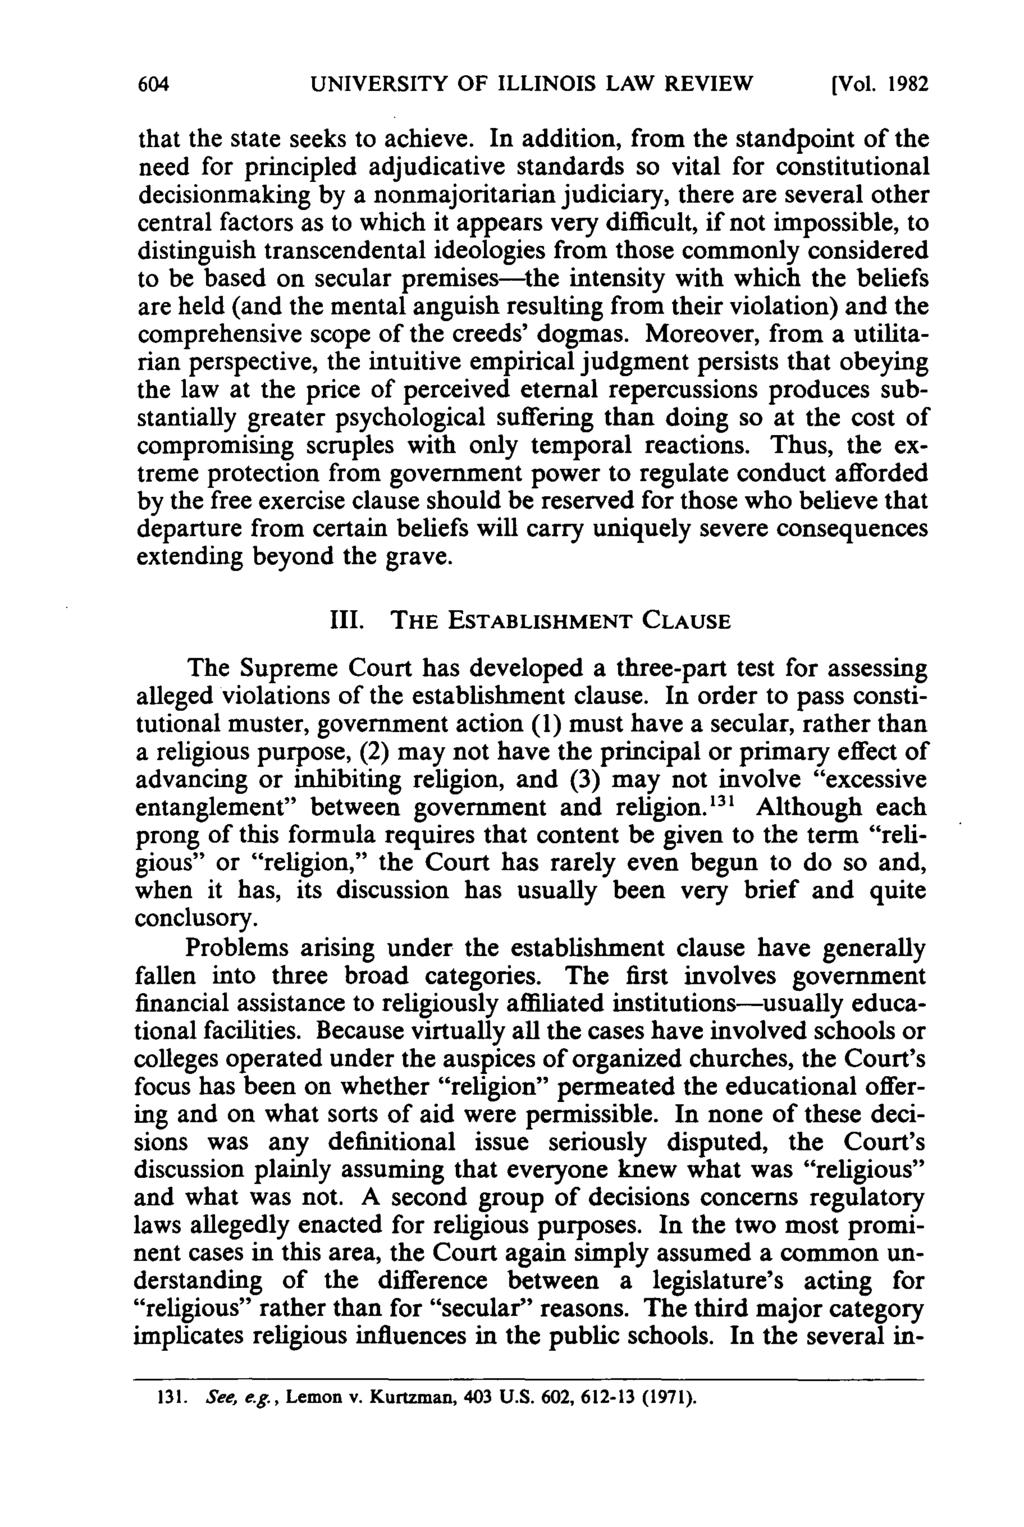 UNIVERSITY OF ILLINOIS LAW REVIEW [Vol. 1982 that the state seeks to achieve.